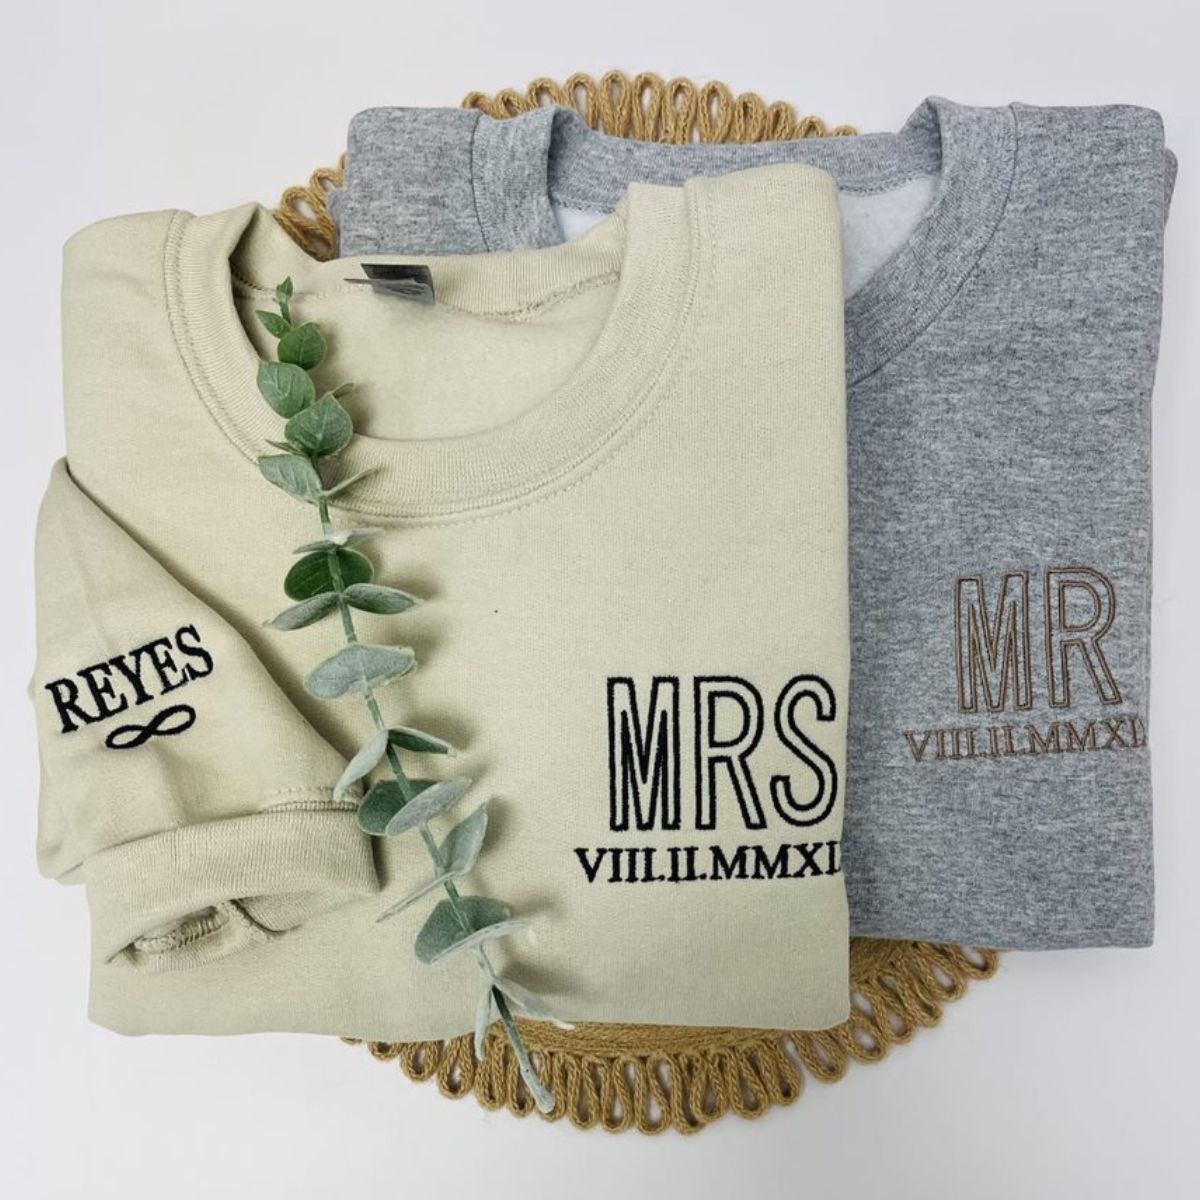 Personalized Mr And Mrs Sweatshirt Embroidered With Aniniversary Date, Best Gift For Couple